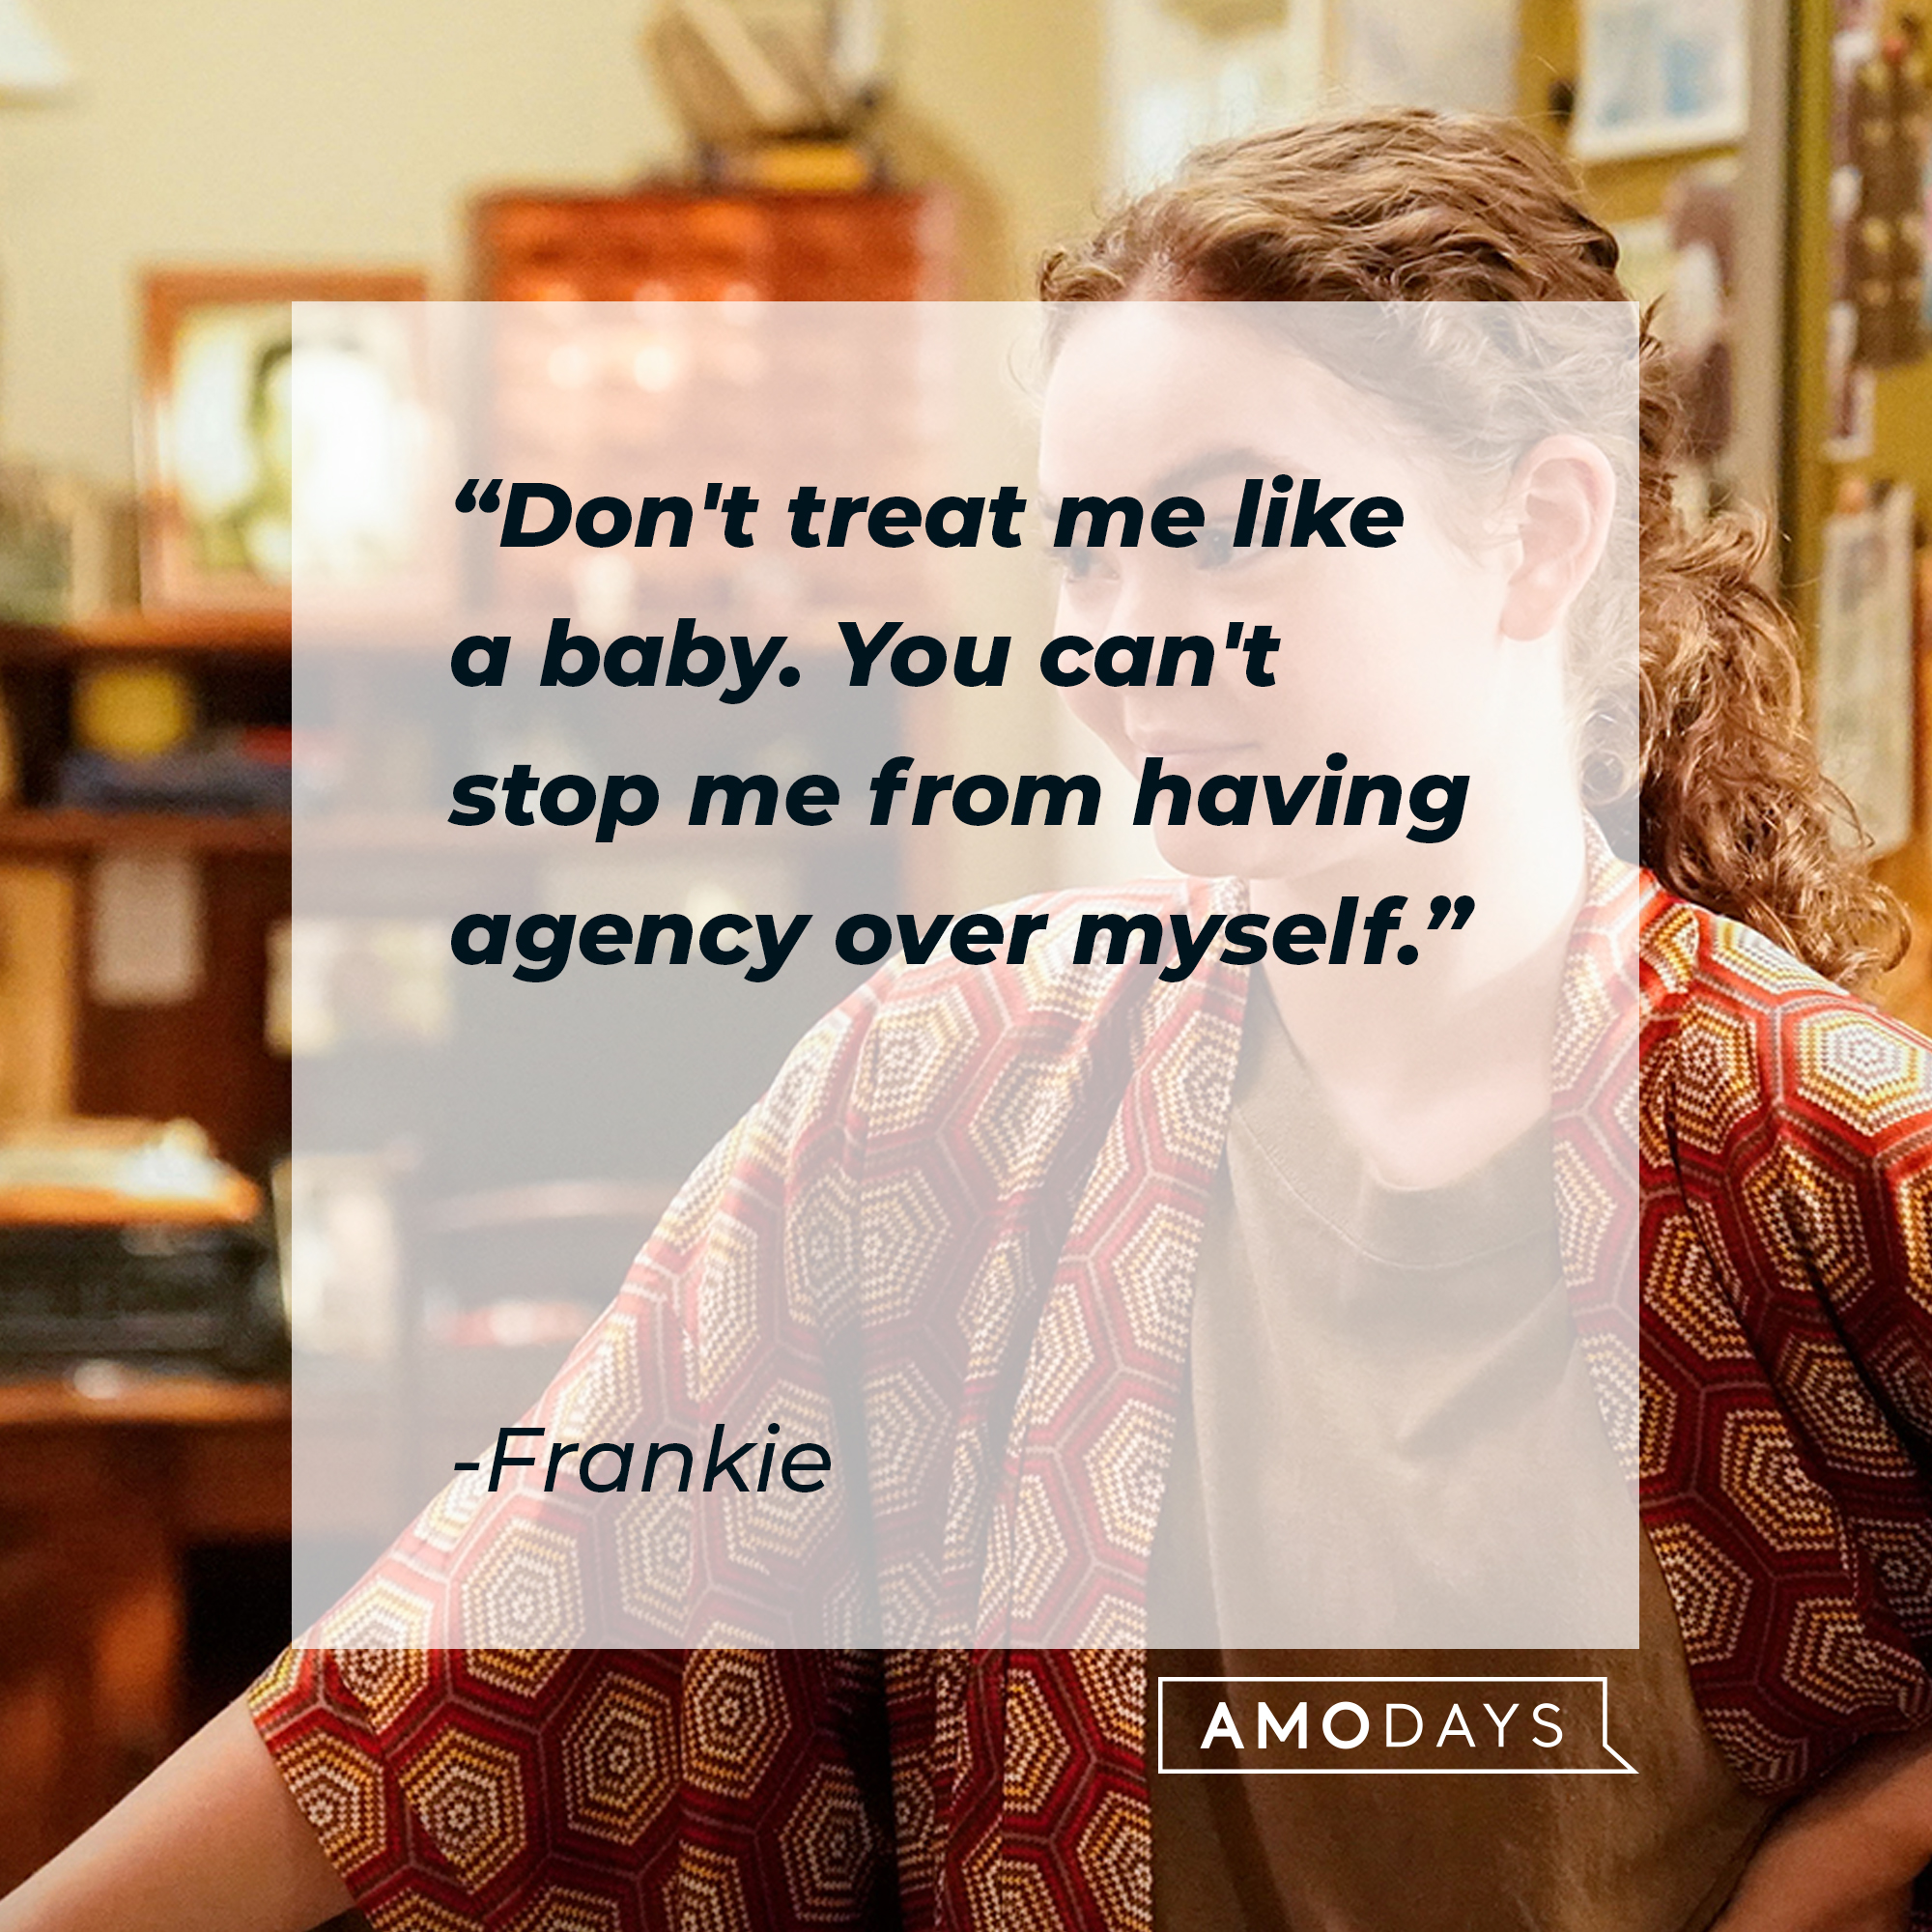 Frankie's quote: "Don't treat me like a baby. You can't stop me from having agency over myself." | Source: facebook.com/BetterThingsFX